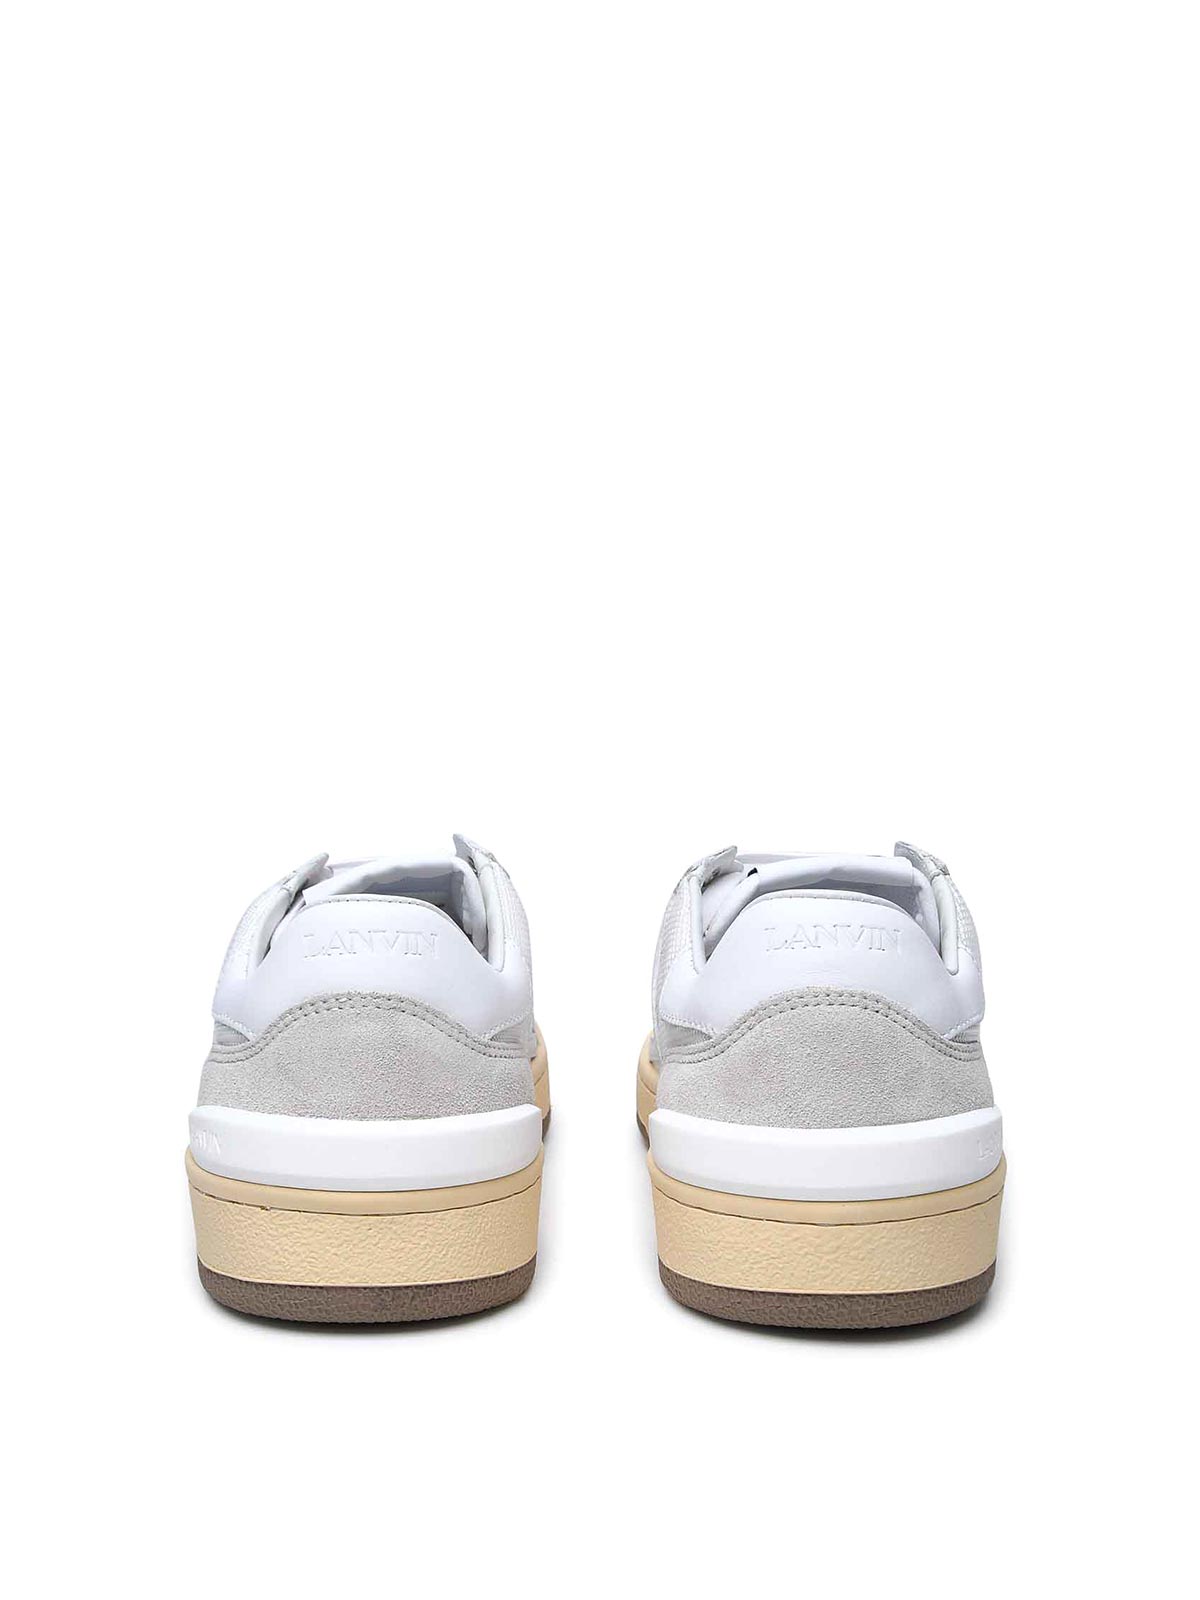 Shop Lanvin White Leather Blend Sneakers